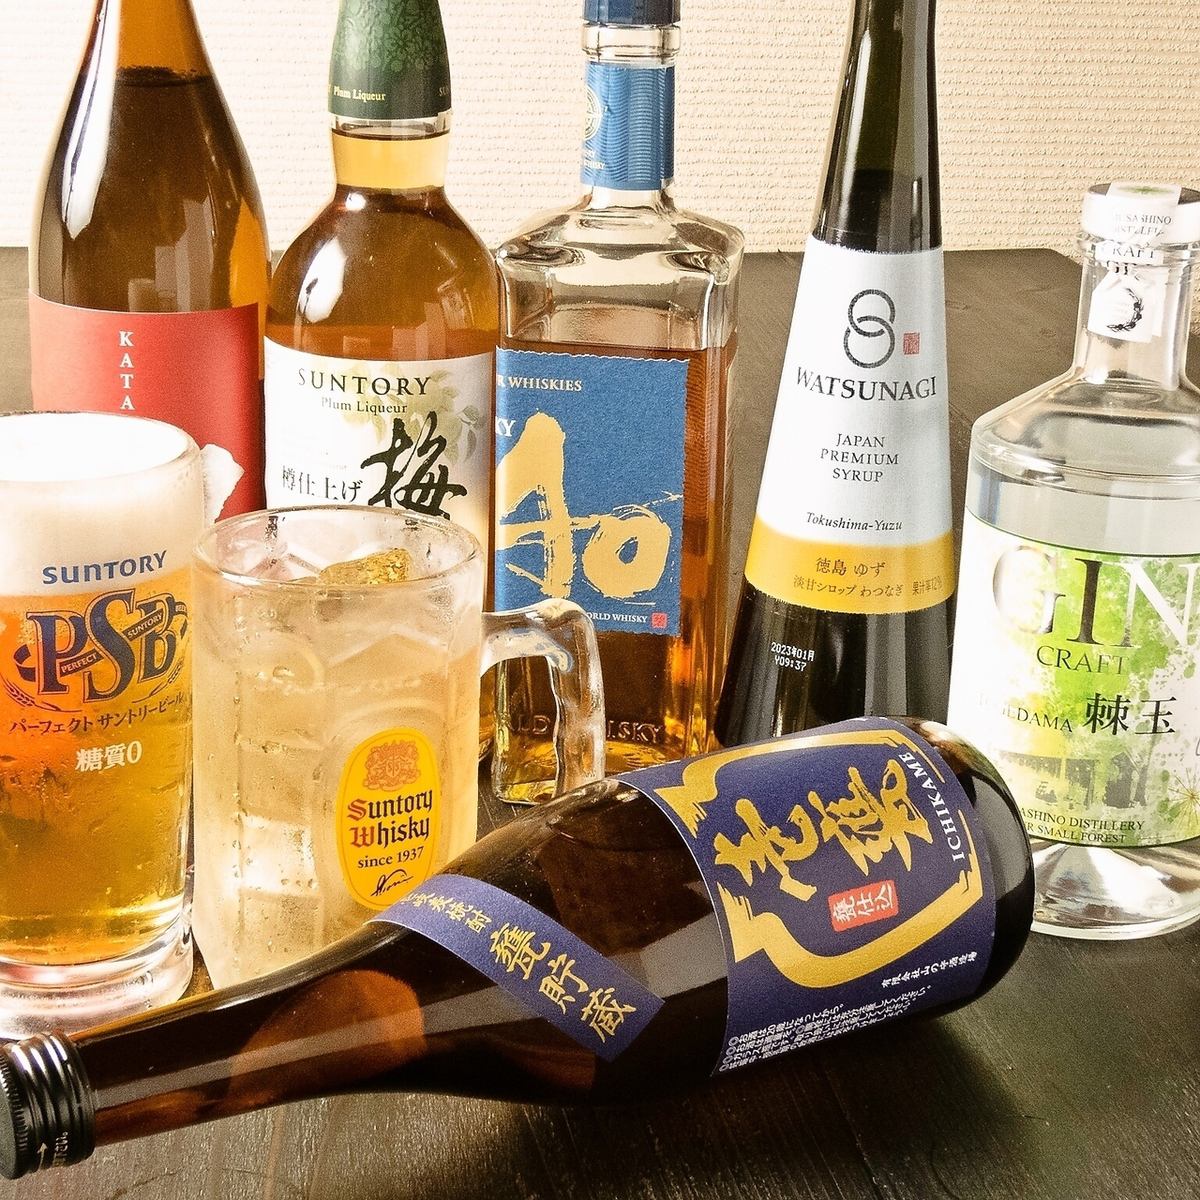 We also have a full lineup of alcoholic beverages.Draft beers include ``Premium Malt's Fragrant Ale'' and ``Perfect Suntory Beer.''We offer ``Premium Malts,'' ``Lemon Beer,'' and ``Blue Moon'' in bottles.